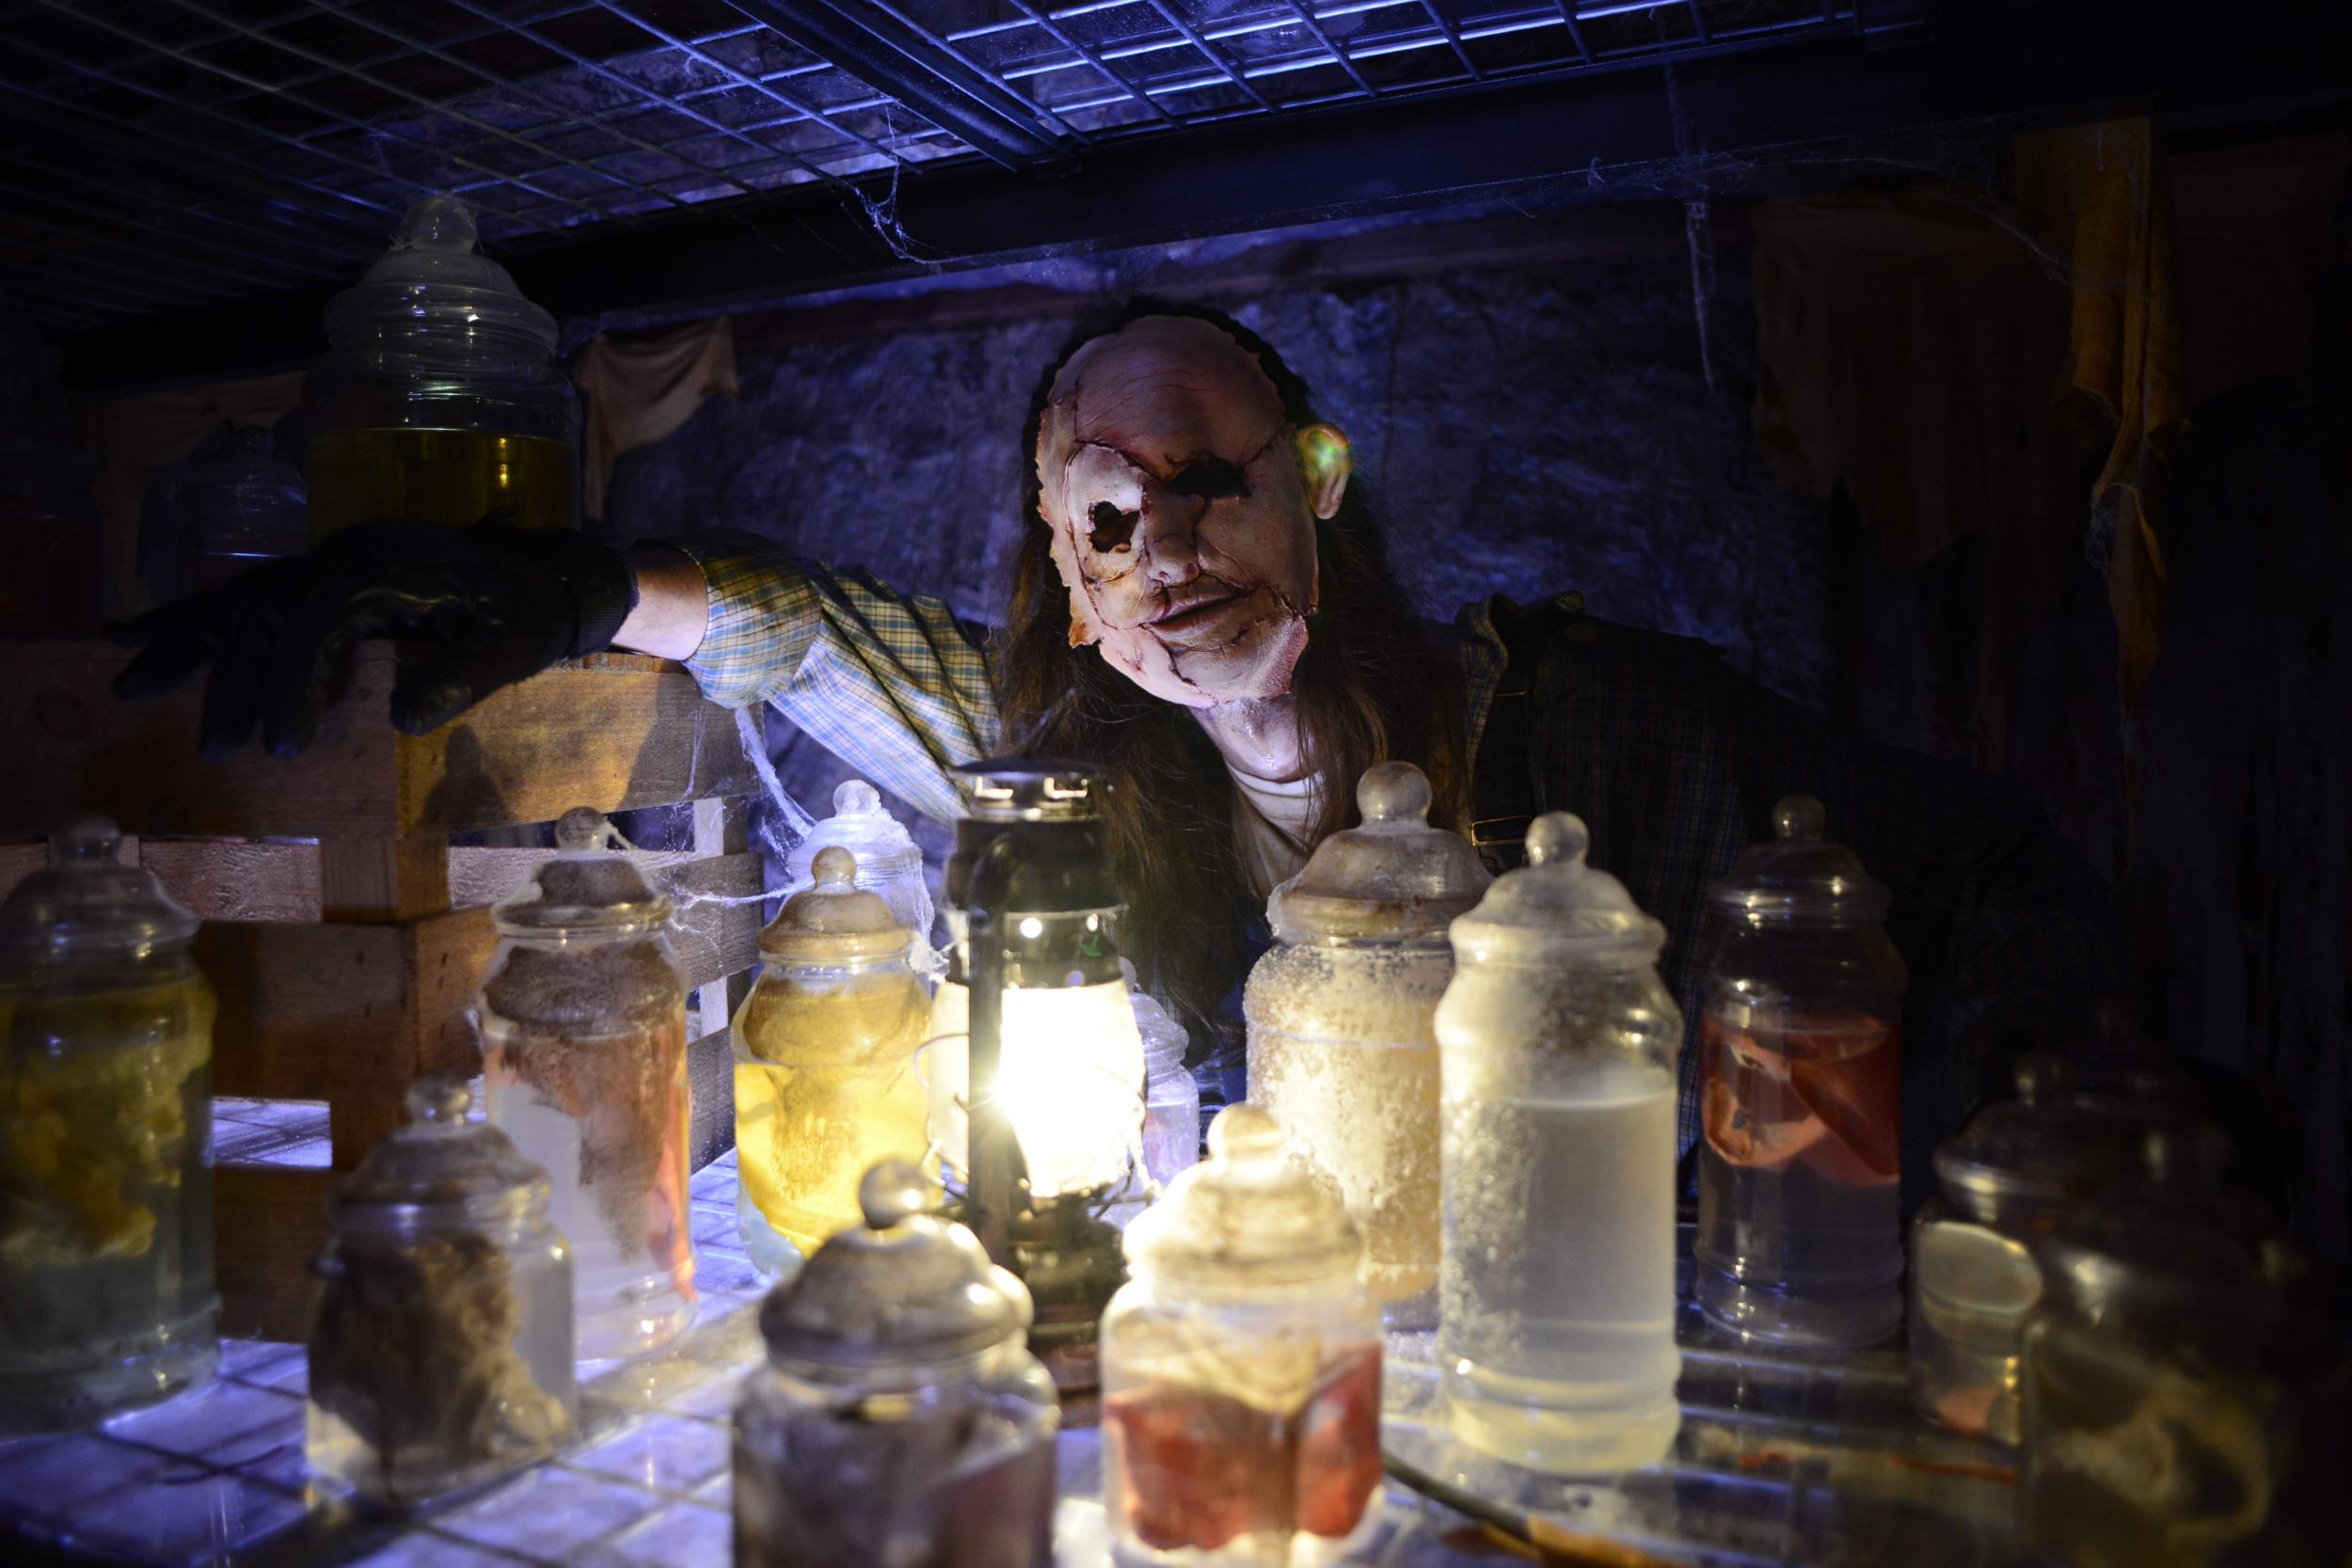 Alton Towers Scarefest uses scare actors to create an interactive experience